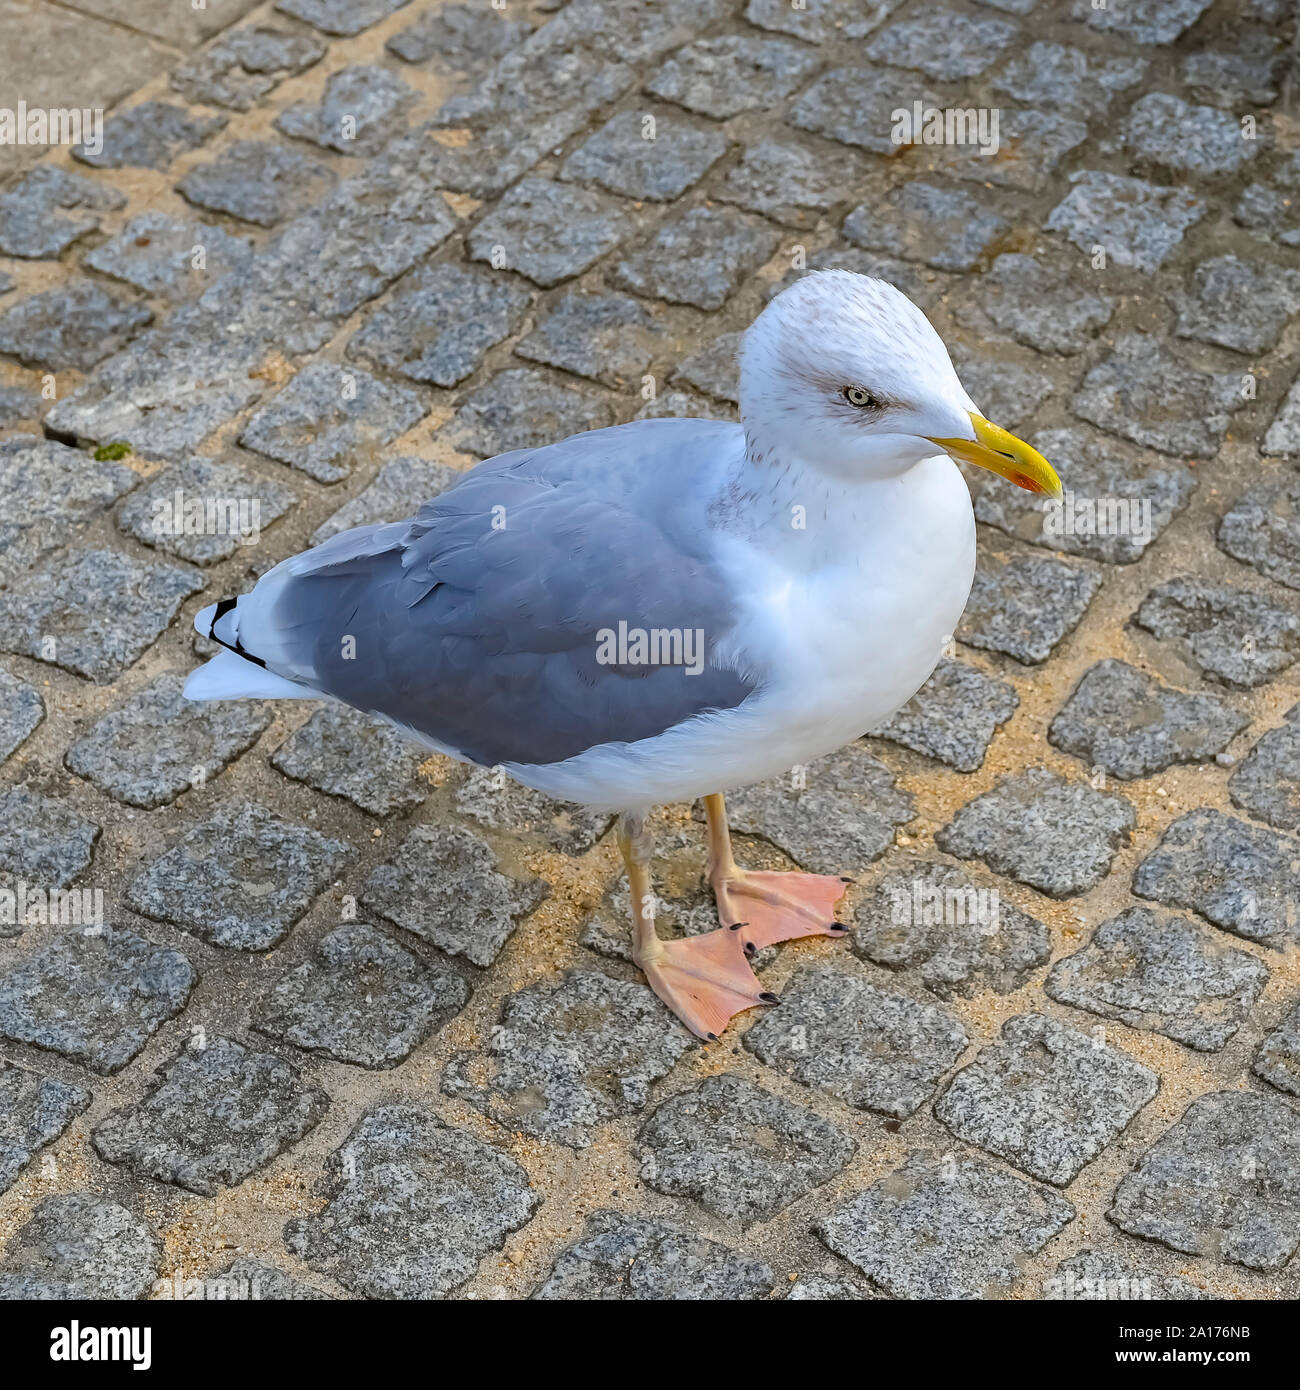 A seagull looking for food on a paved beach promenade. Stock Photo